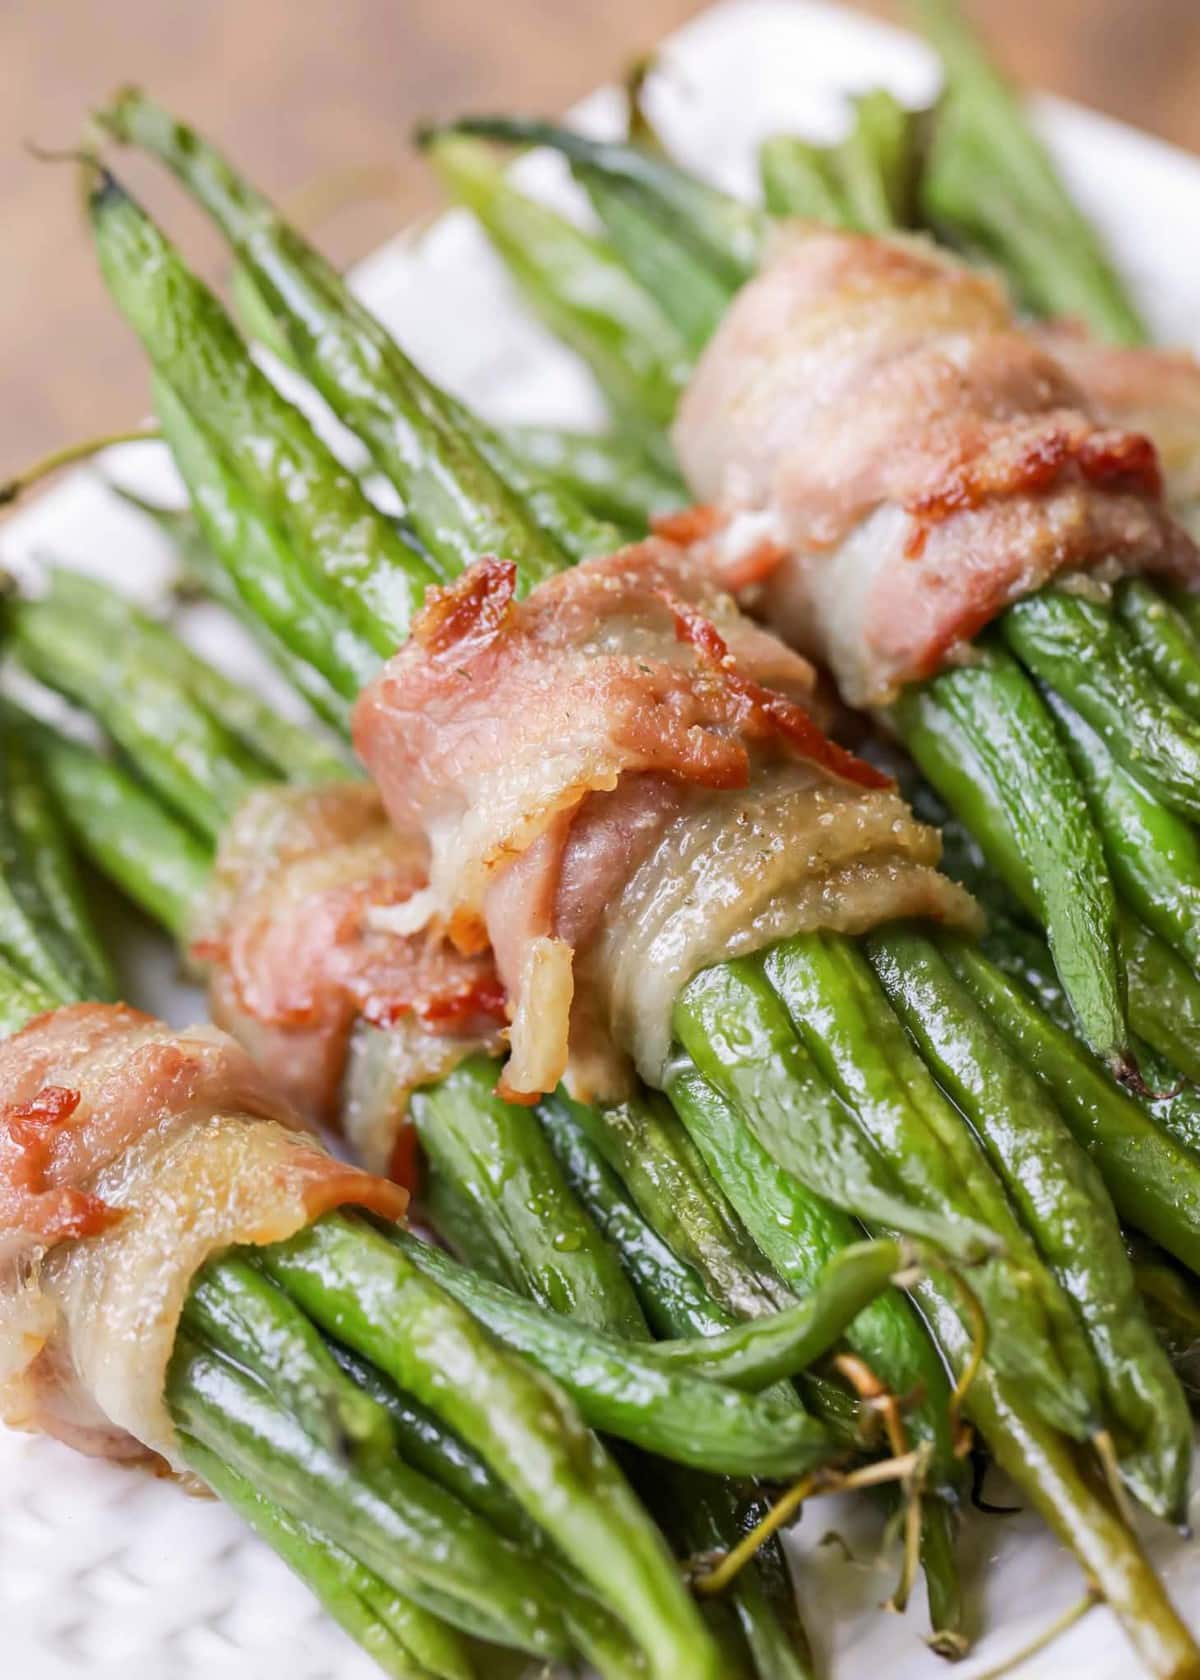 Green Beans bundles wrapped in bacon and served on a platter.